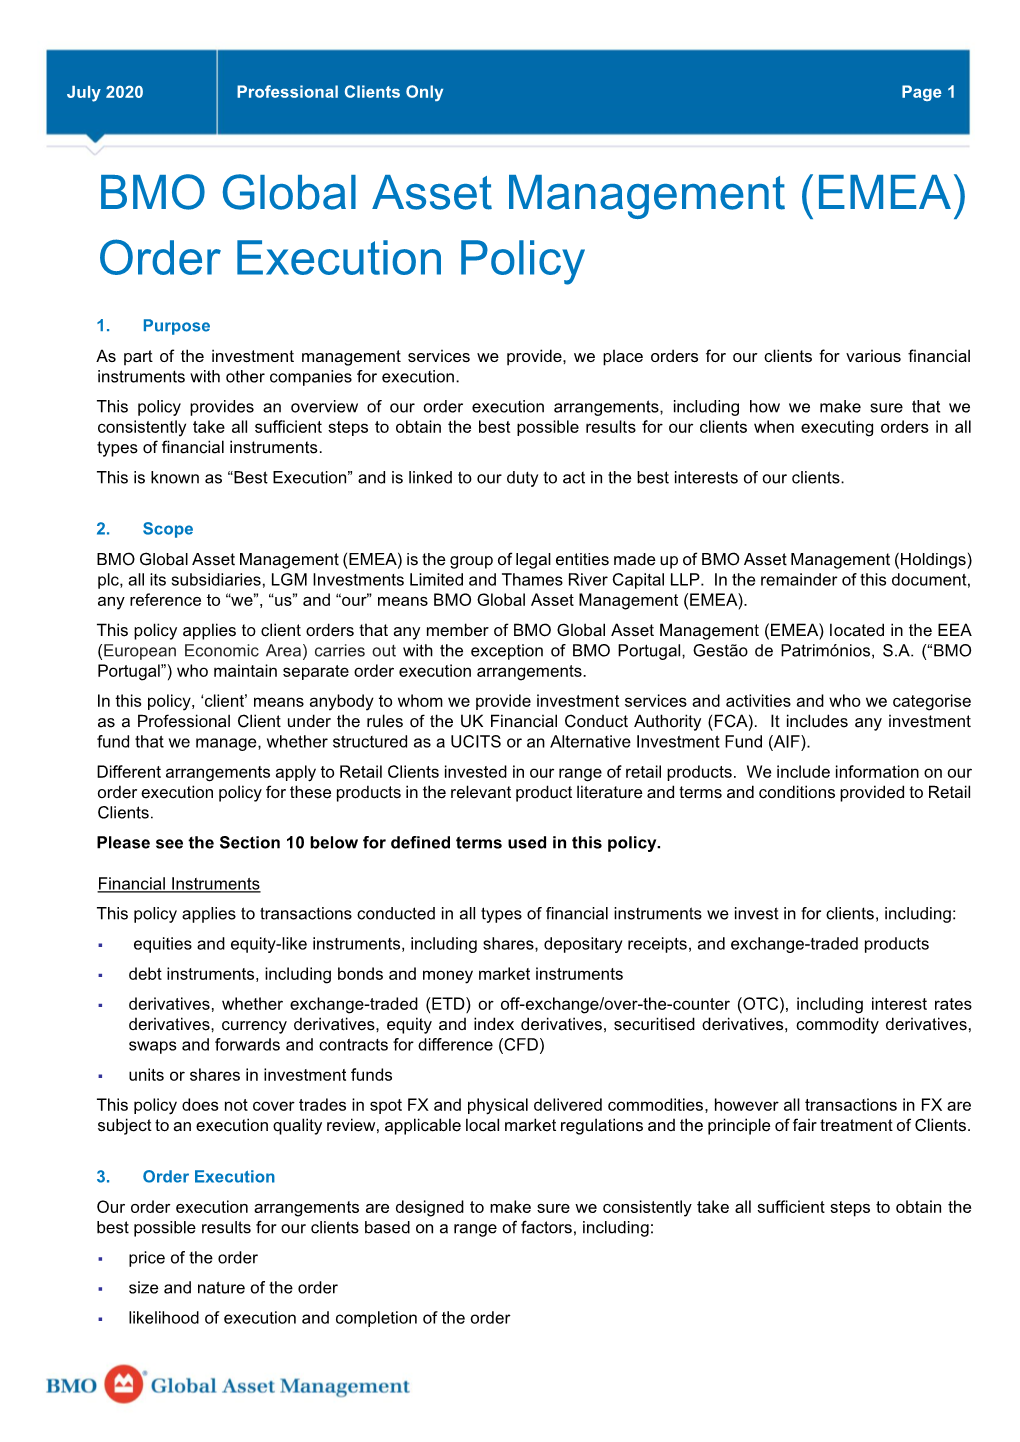 BMO Global Asset Management (EMEA) Order Execution Policy